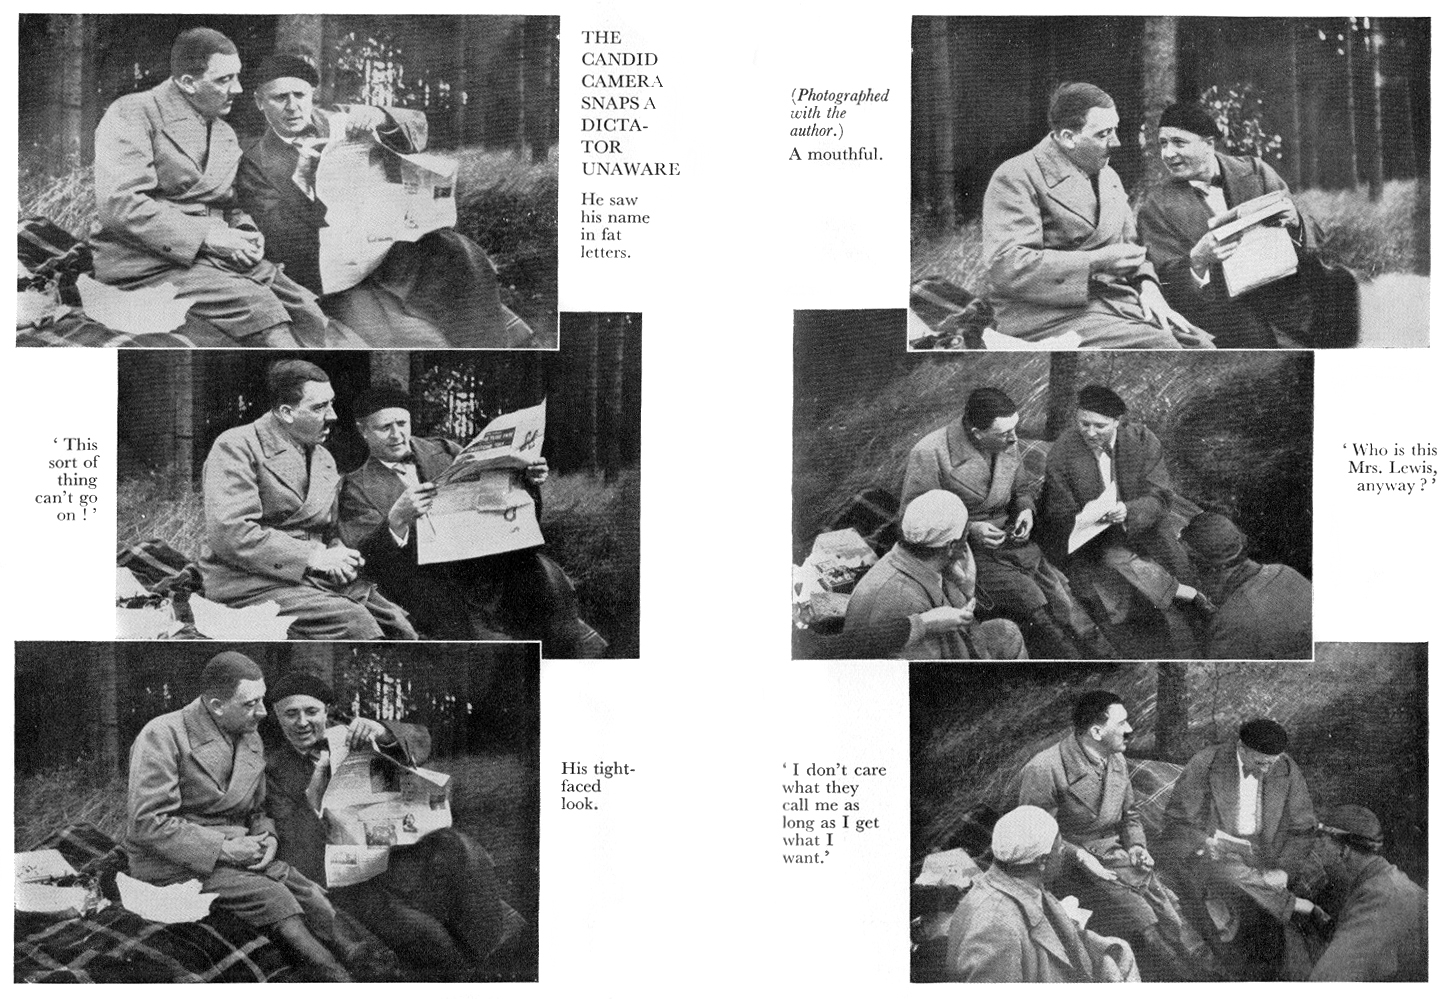 Adolf Hitler reads a newspaper with Kurt Lüdecke during a picknick on their way to the first Reichsjugendtagder NSDAP (day of the Hitler Youth) in Potsdam